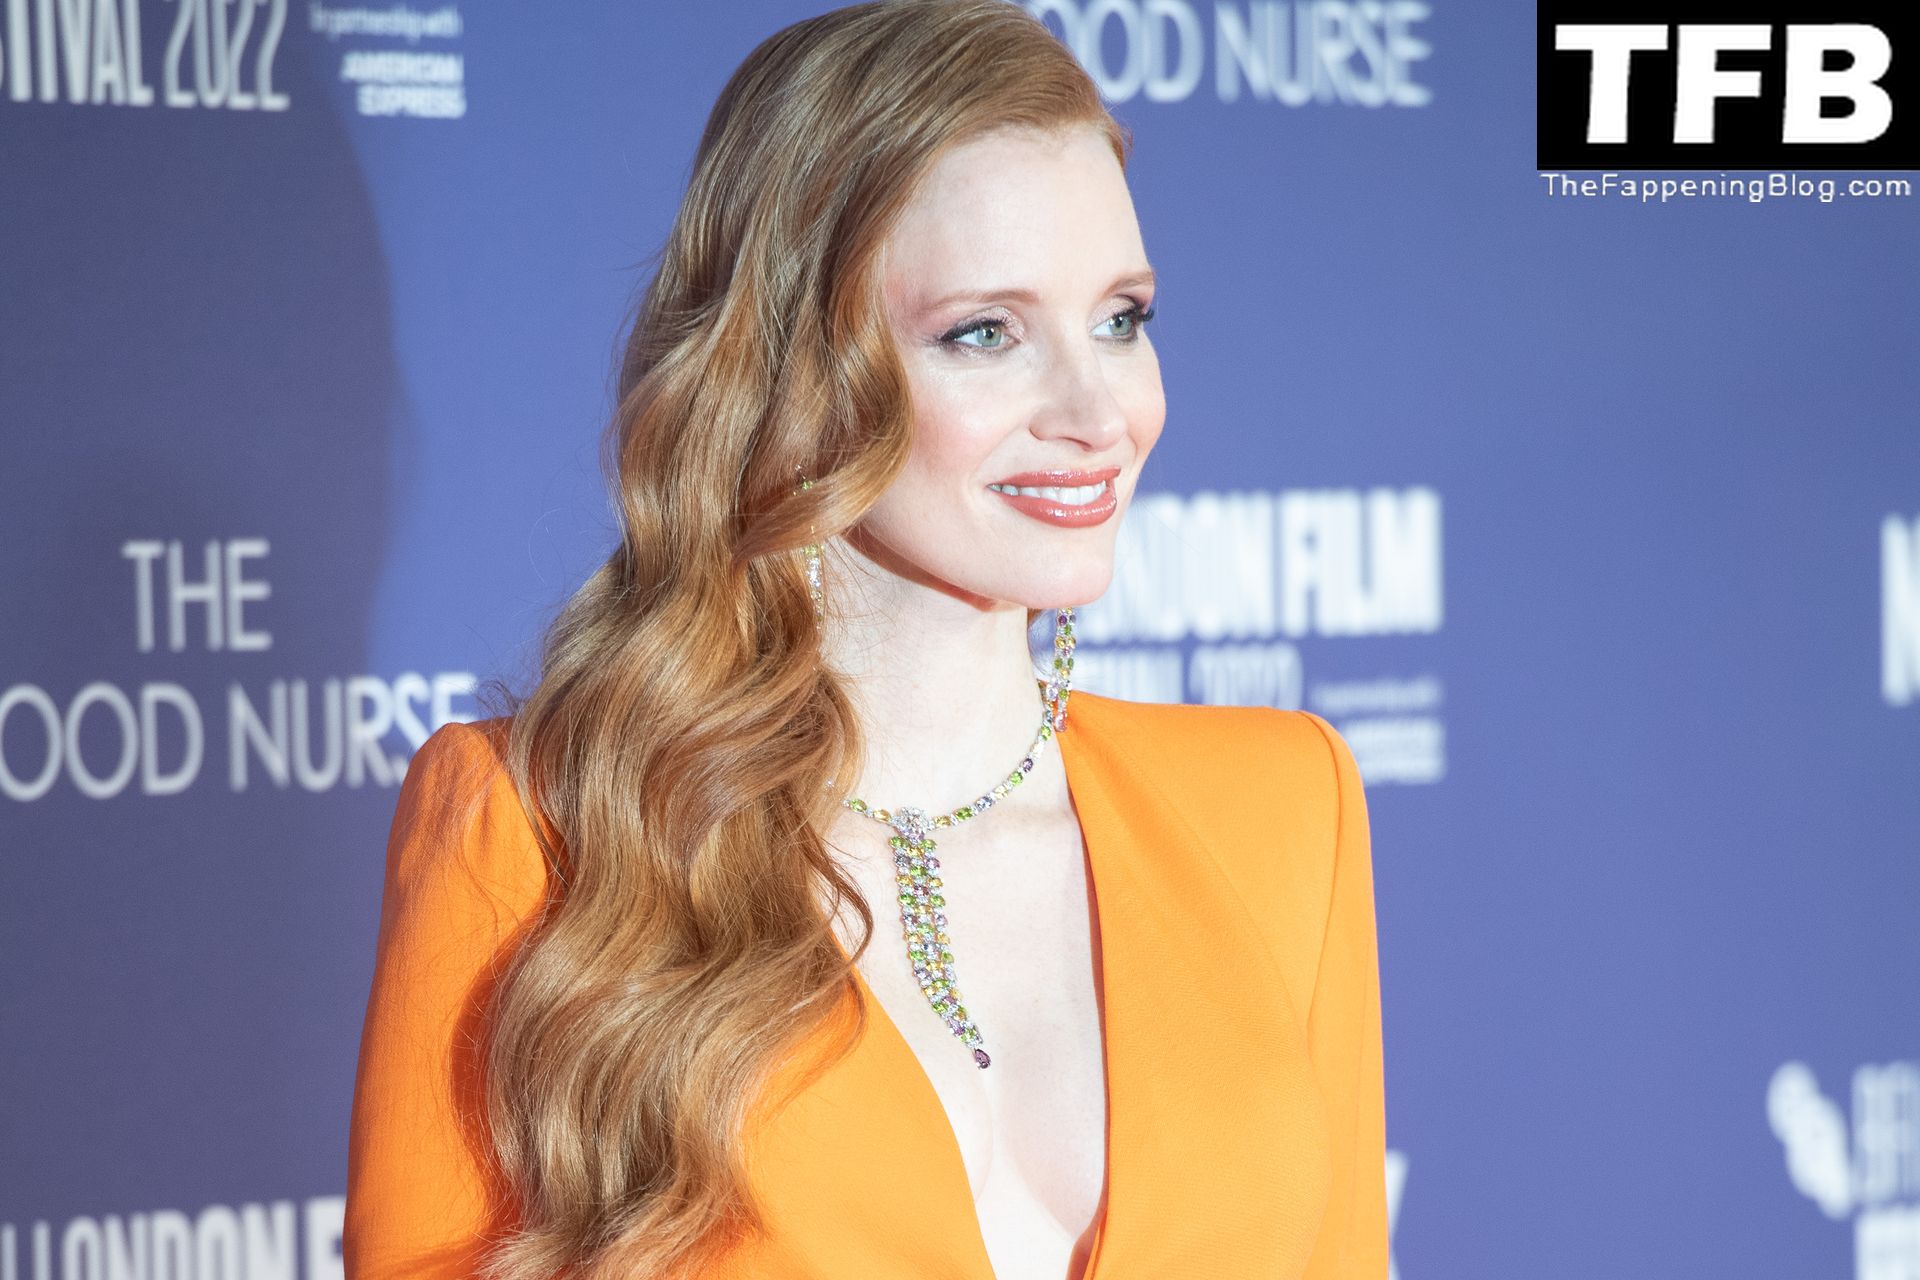 Jessica-Chastain-Sexy-The-Fappening-Blog-93.jpg